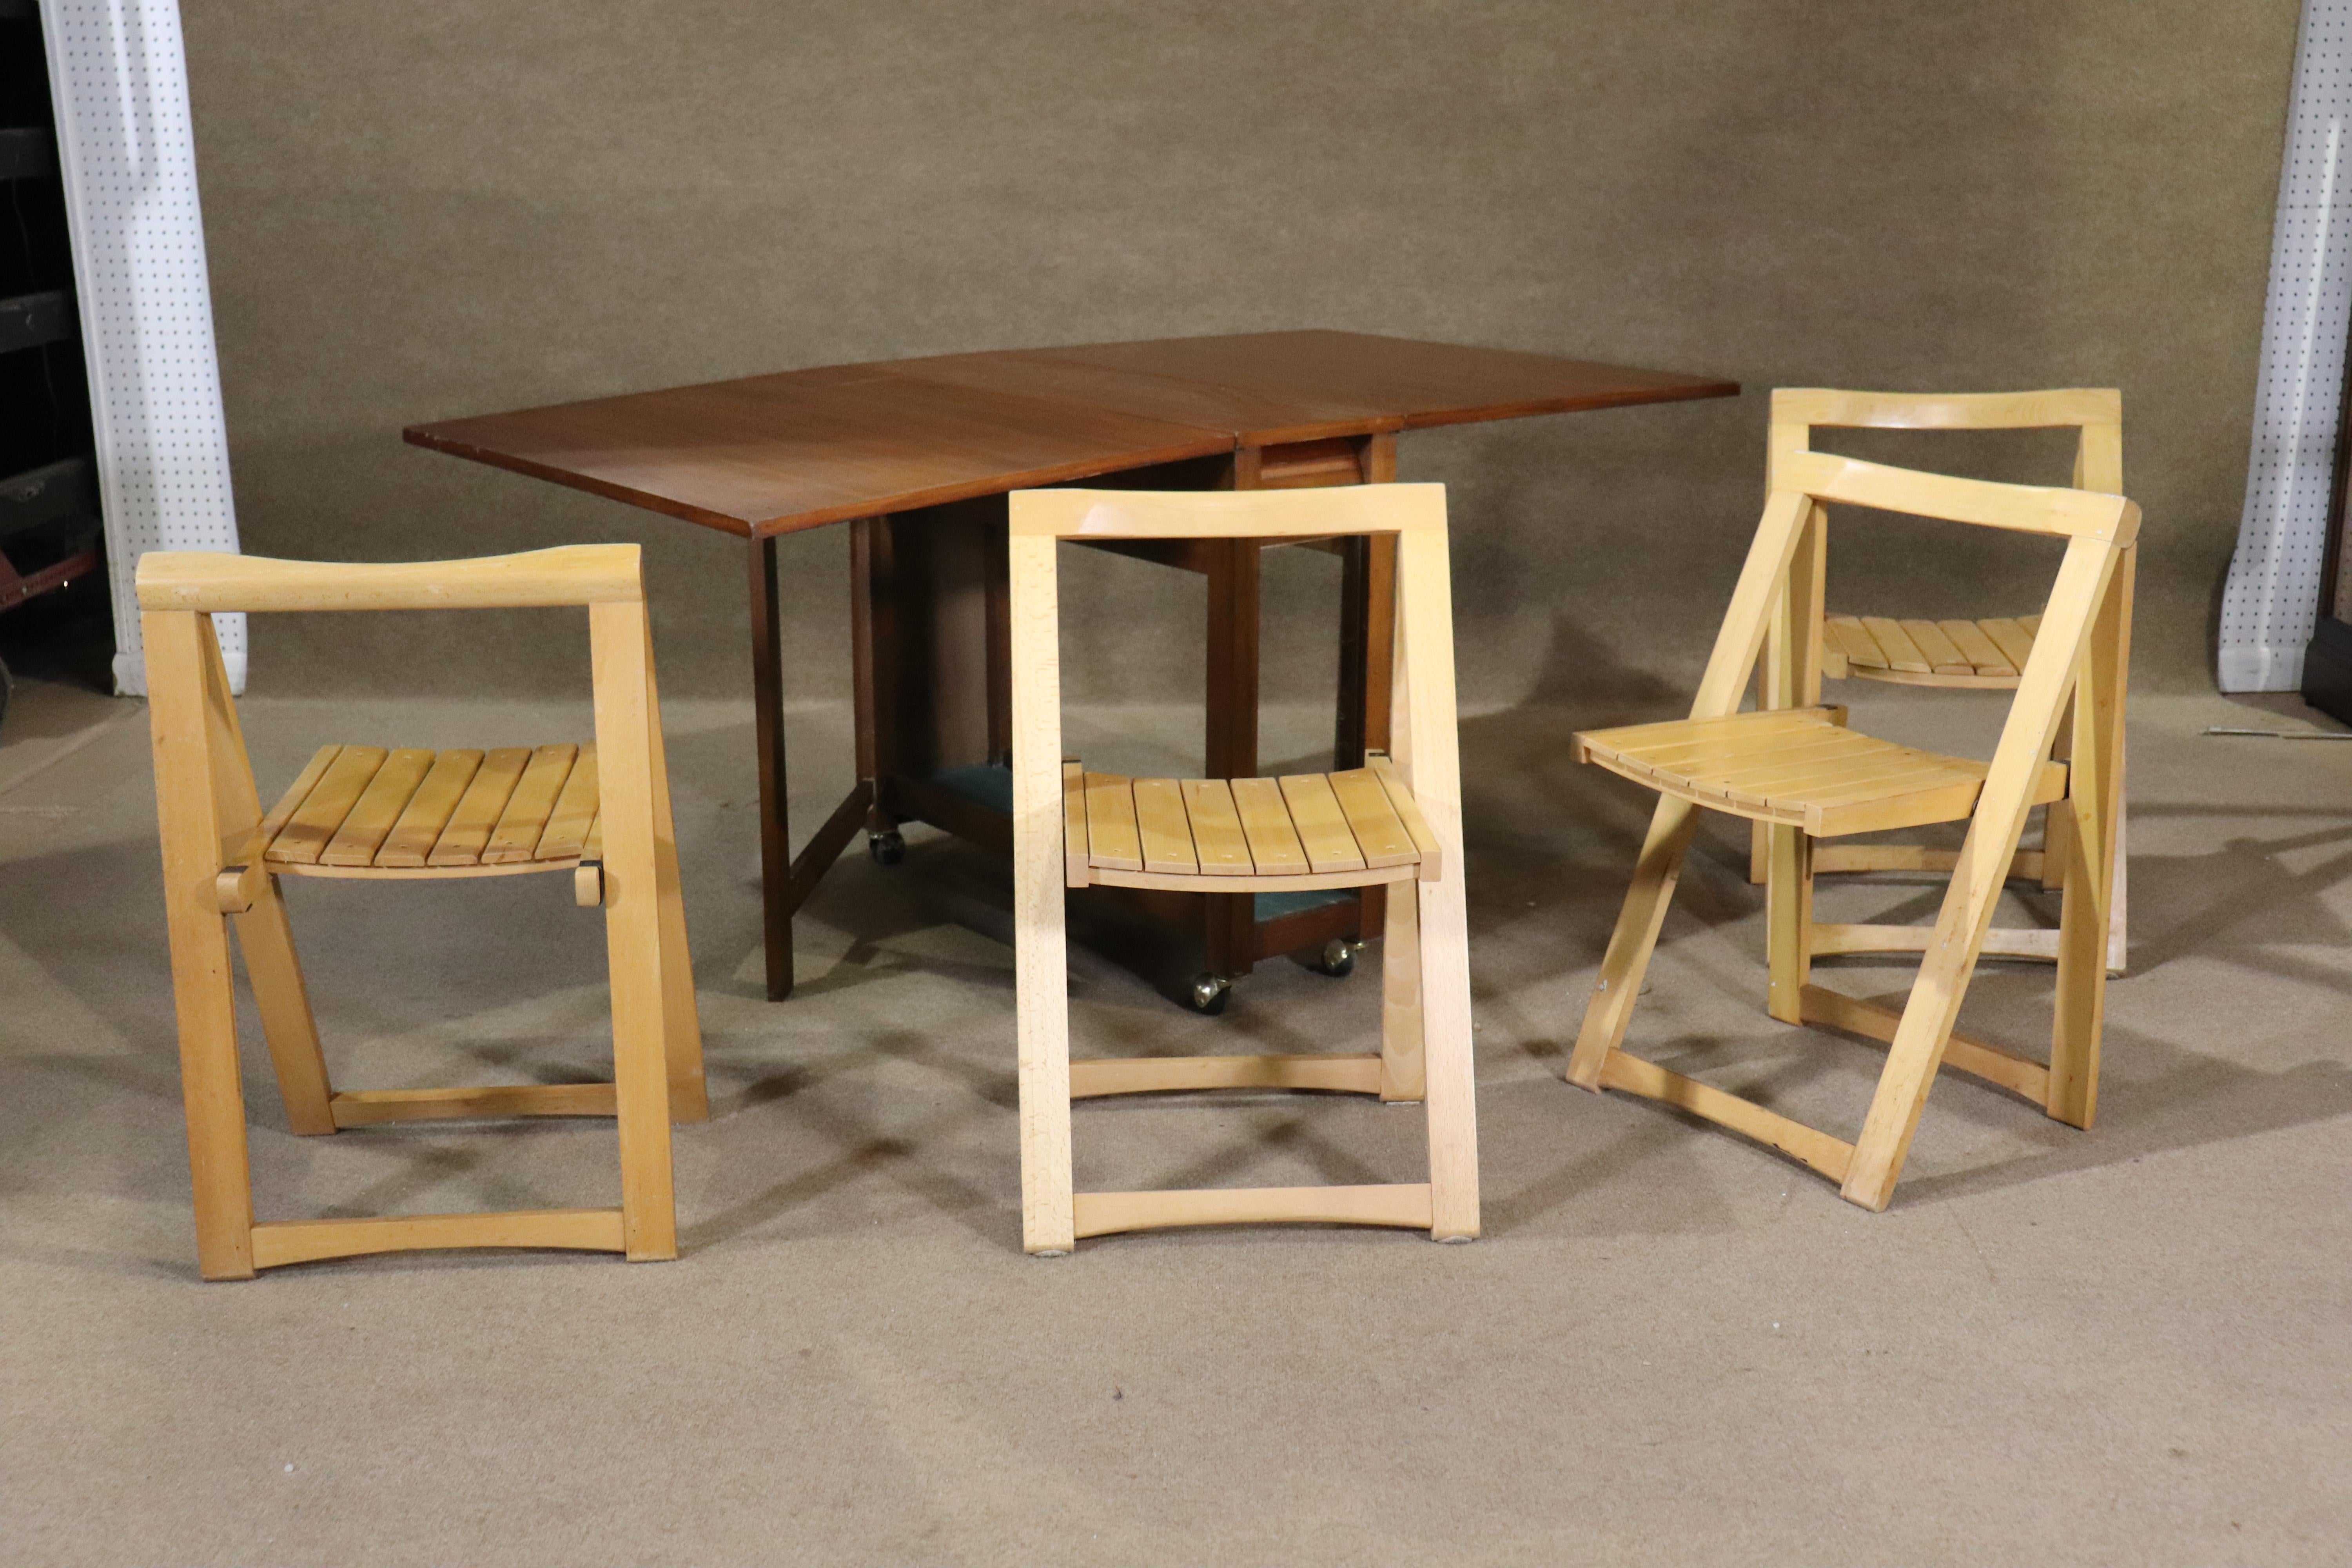 Danish made dining table with four chairs. Table has two leaves that expand from 13